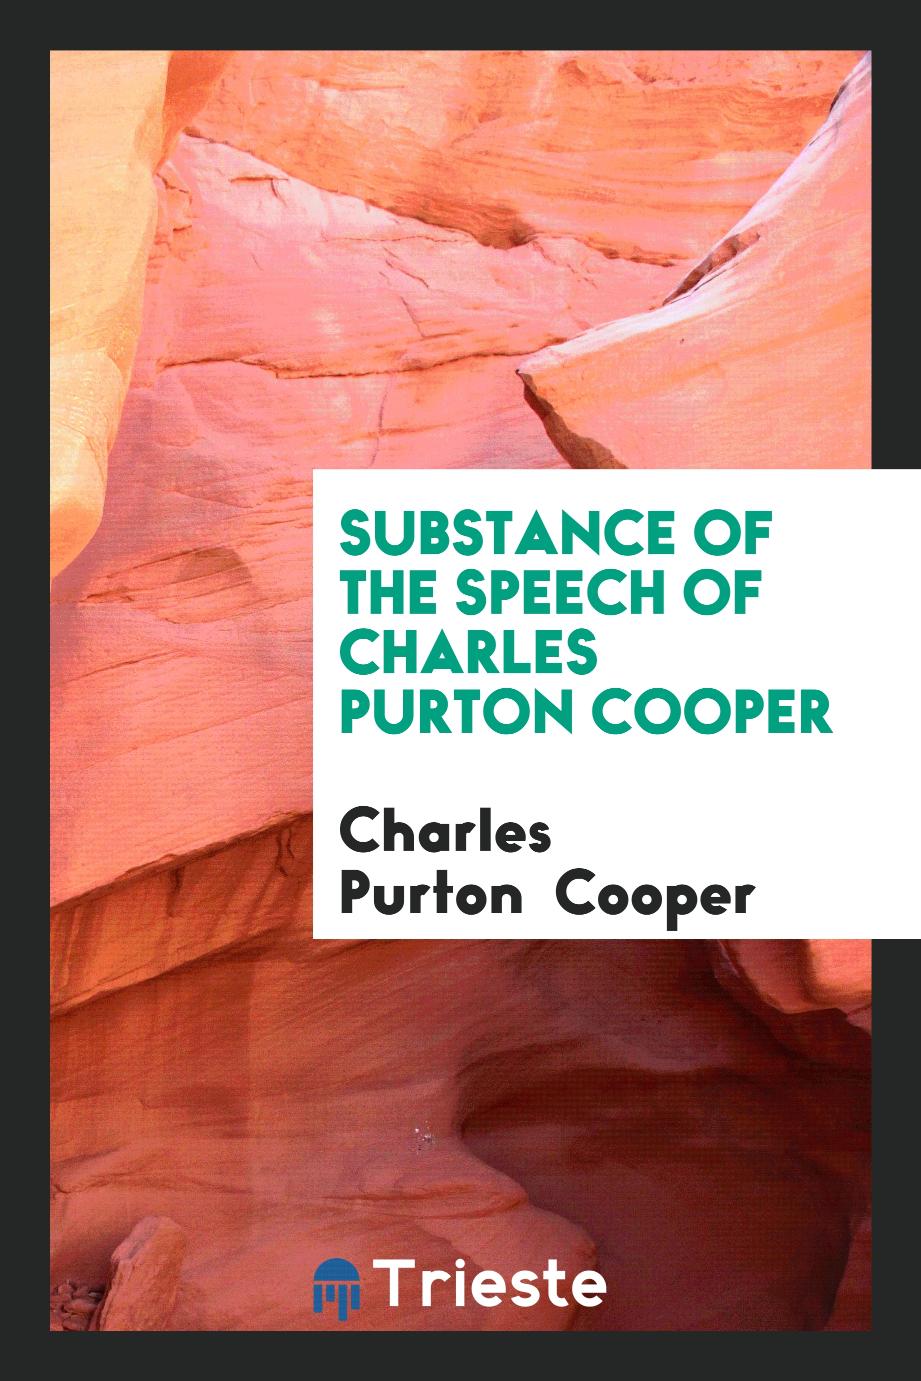 Substance of the speech of Charles Purton Cooper